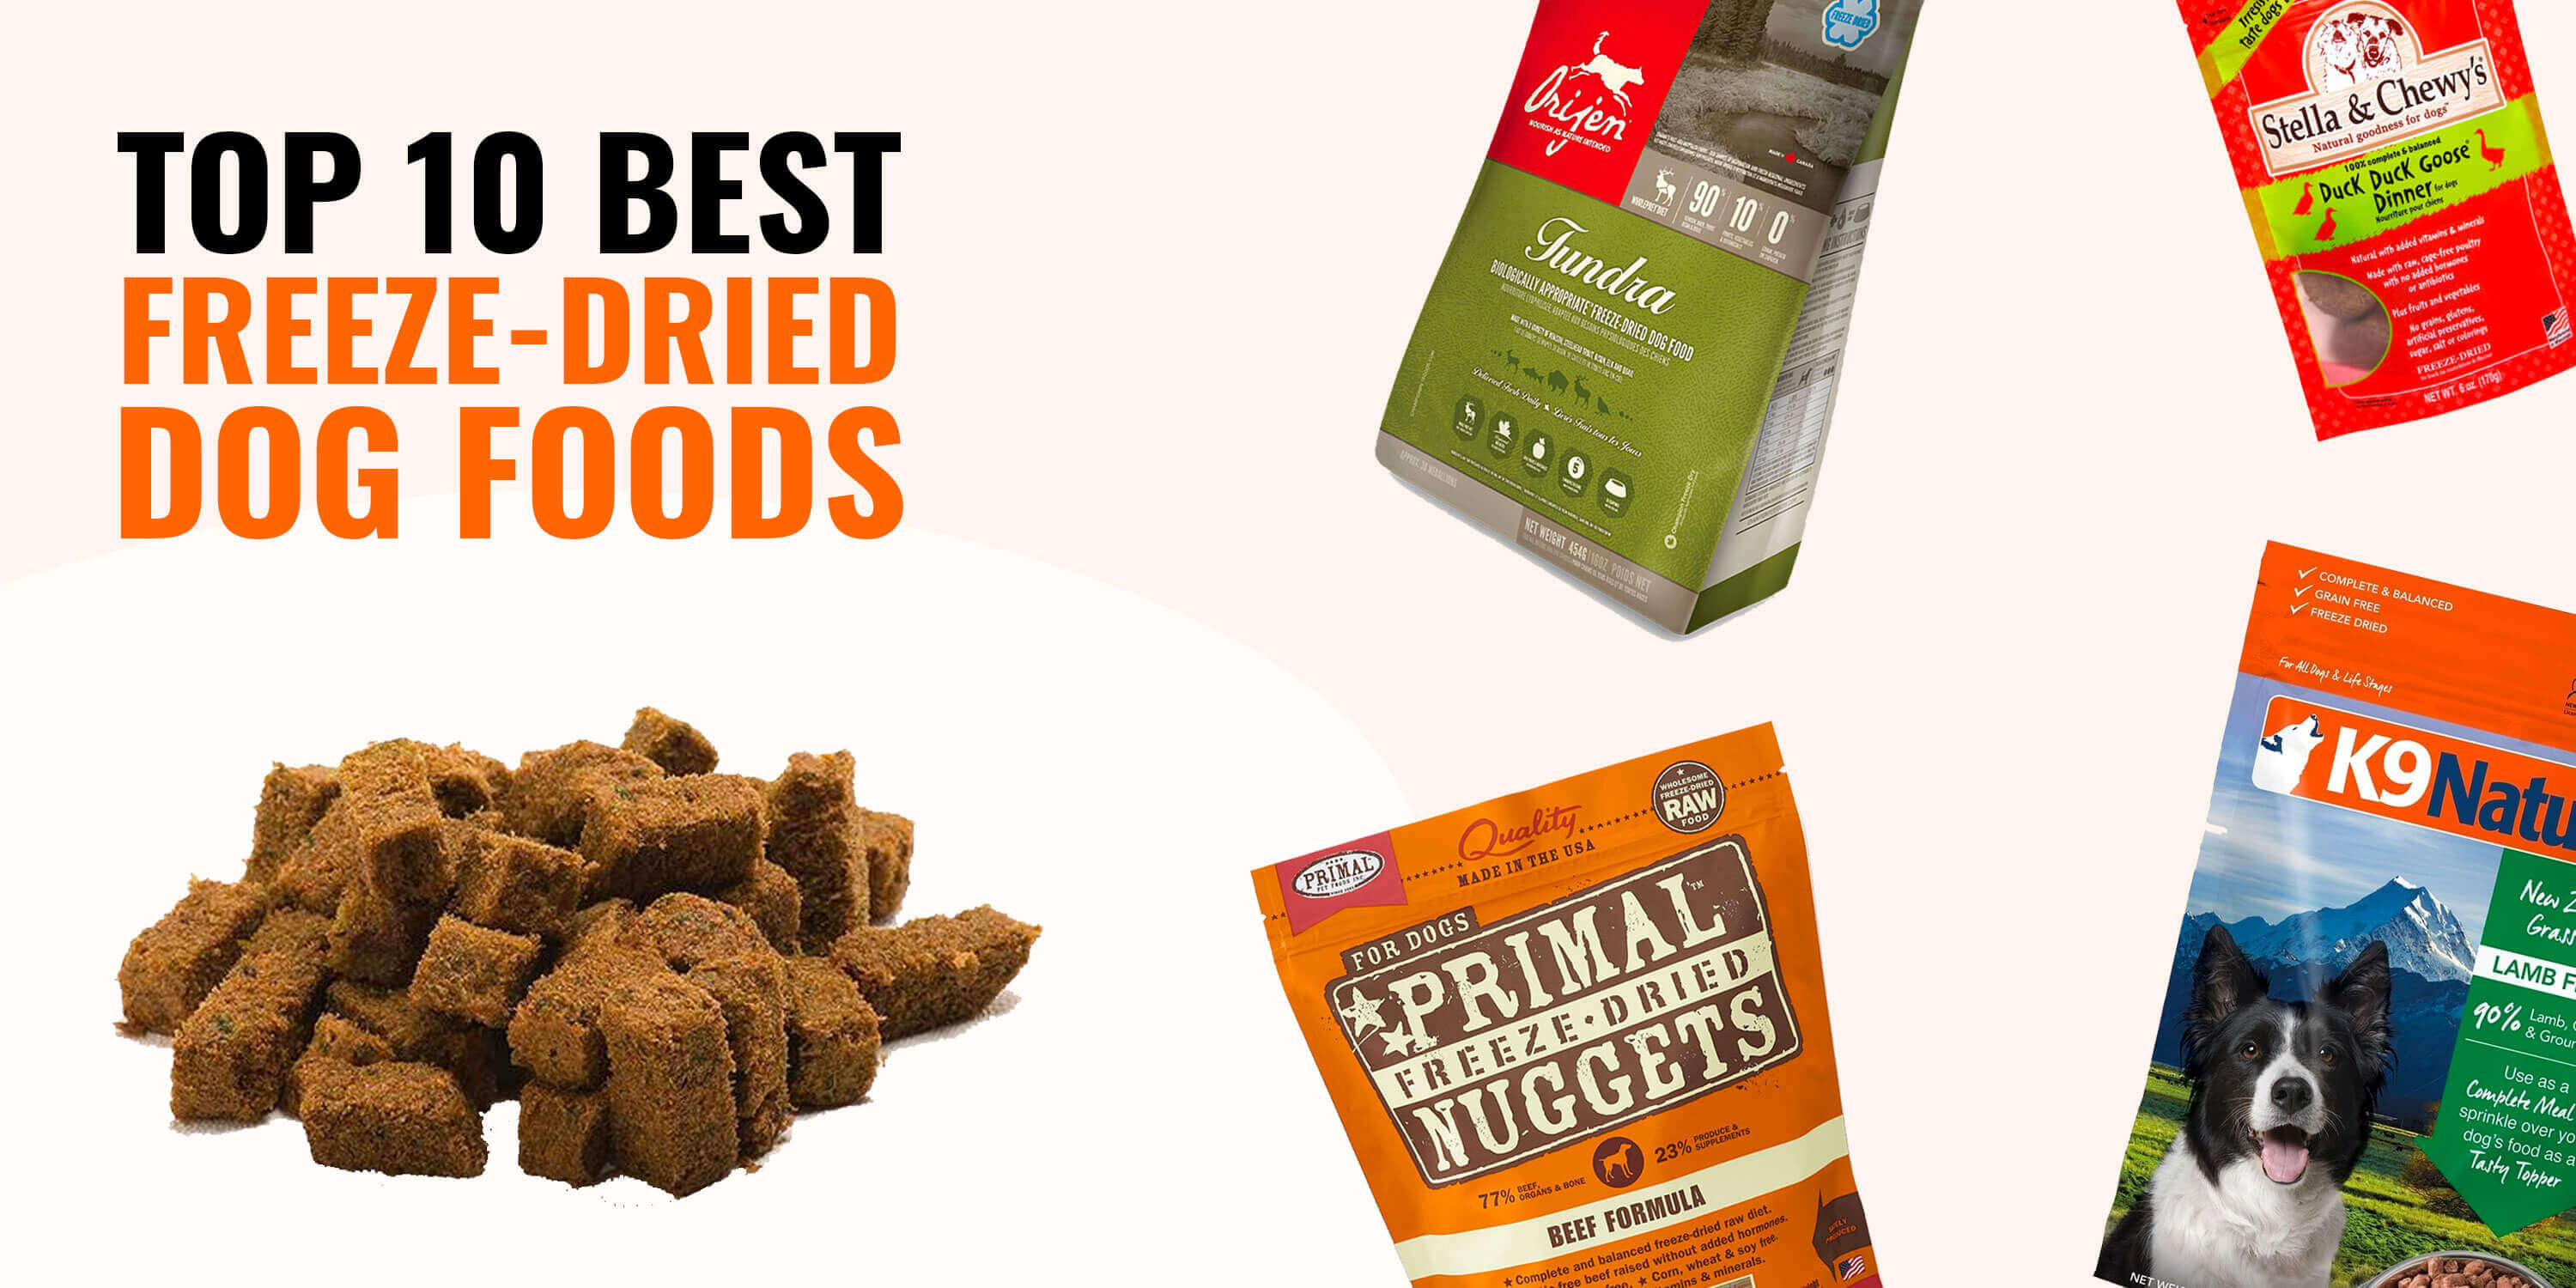 Best FreezeDried Dog Foods Reviews, Guide, Pros & Cons